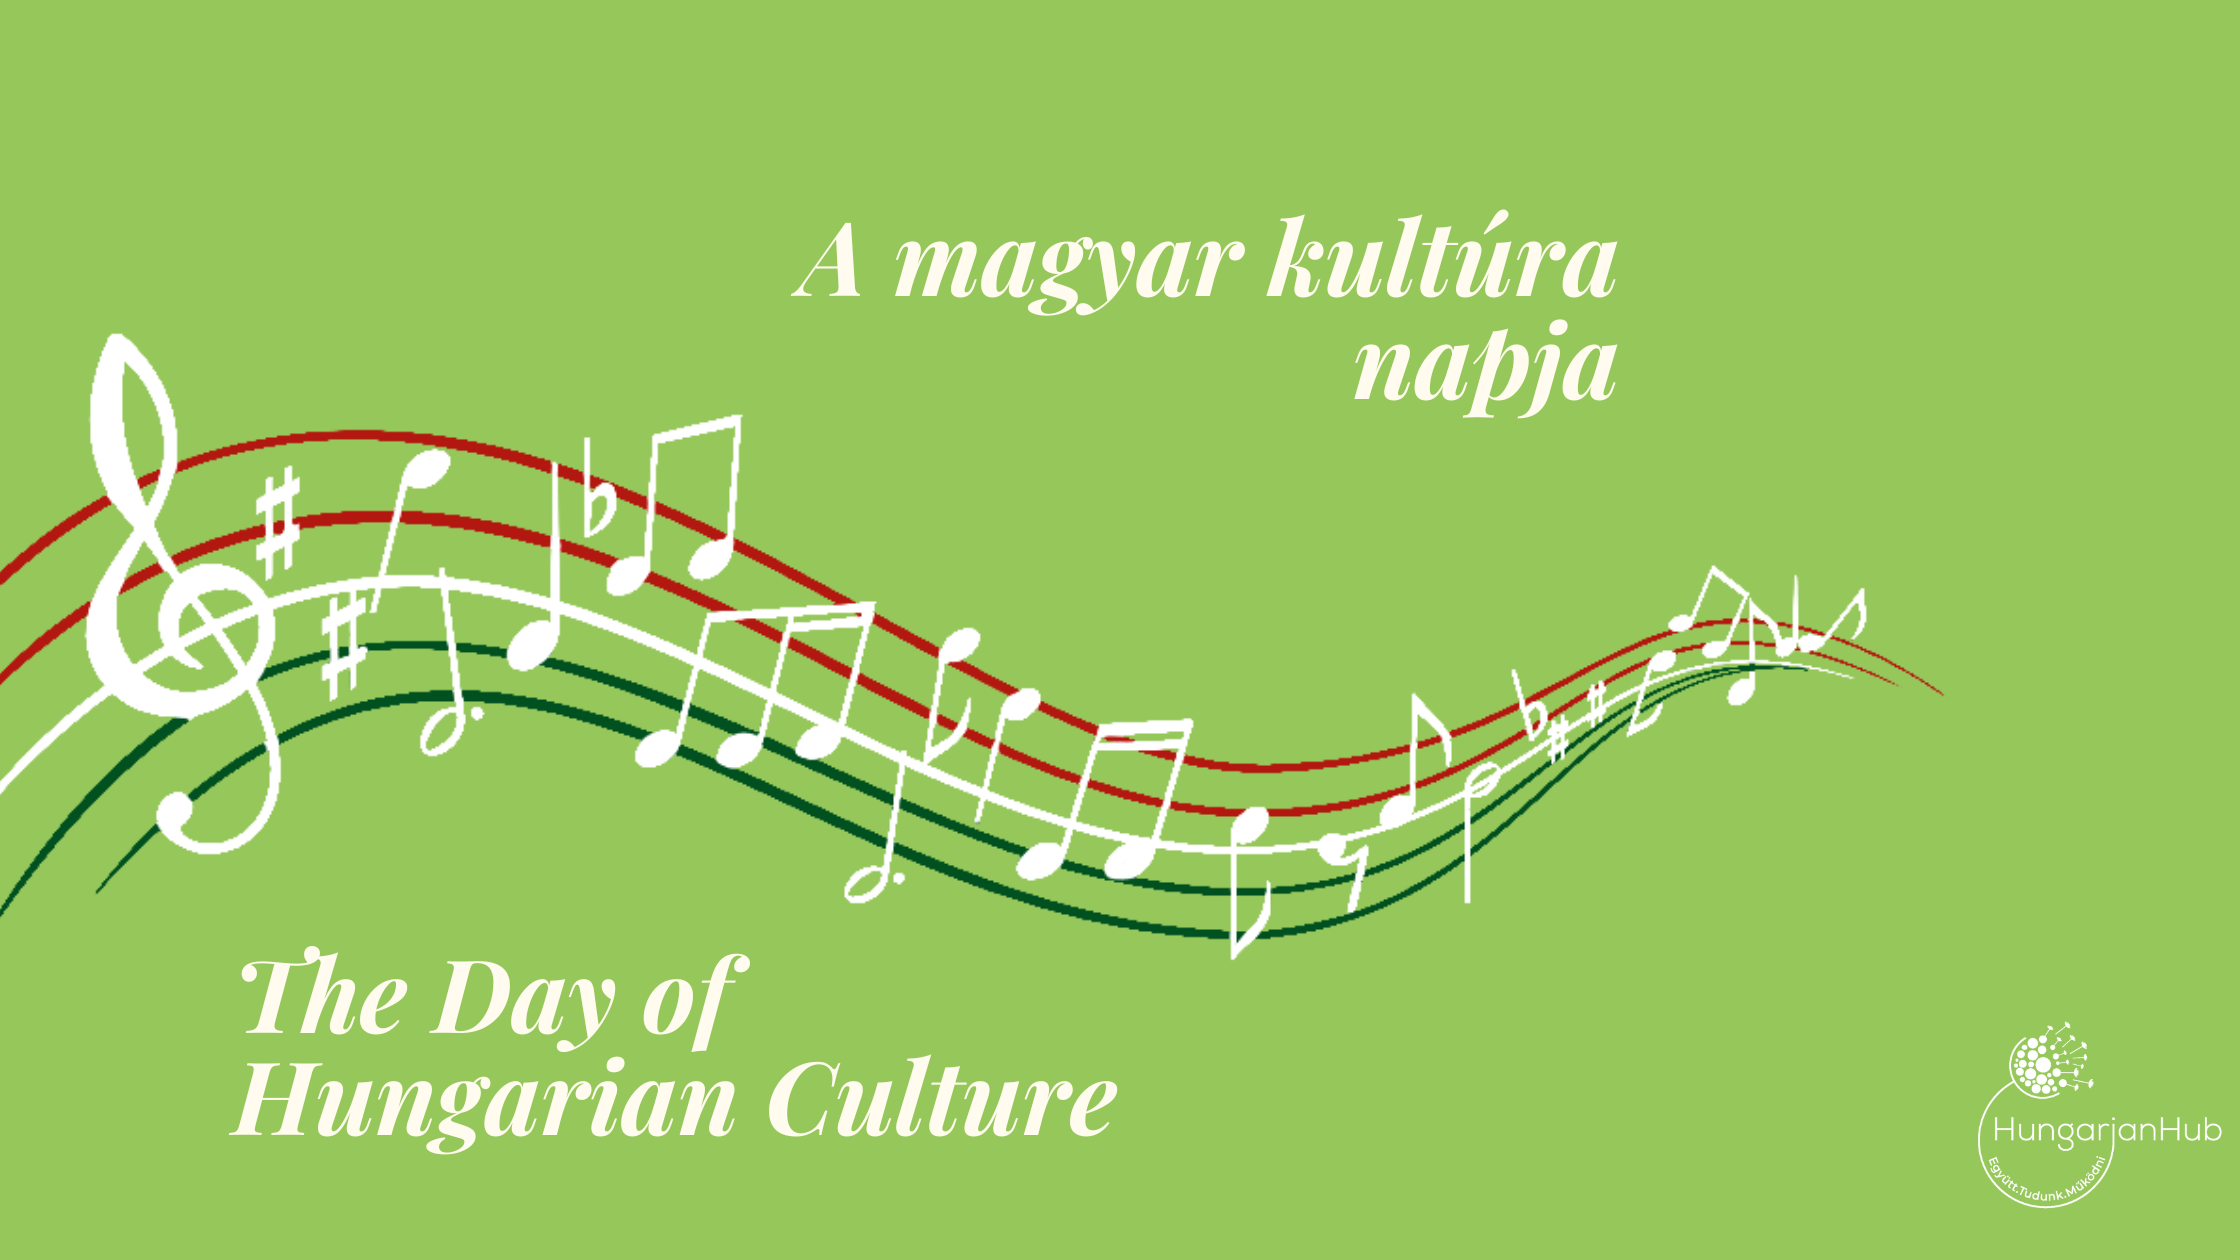 Updated: Series Of Programmes in Budapest to Mark Day of Hungarian Culture